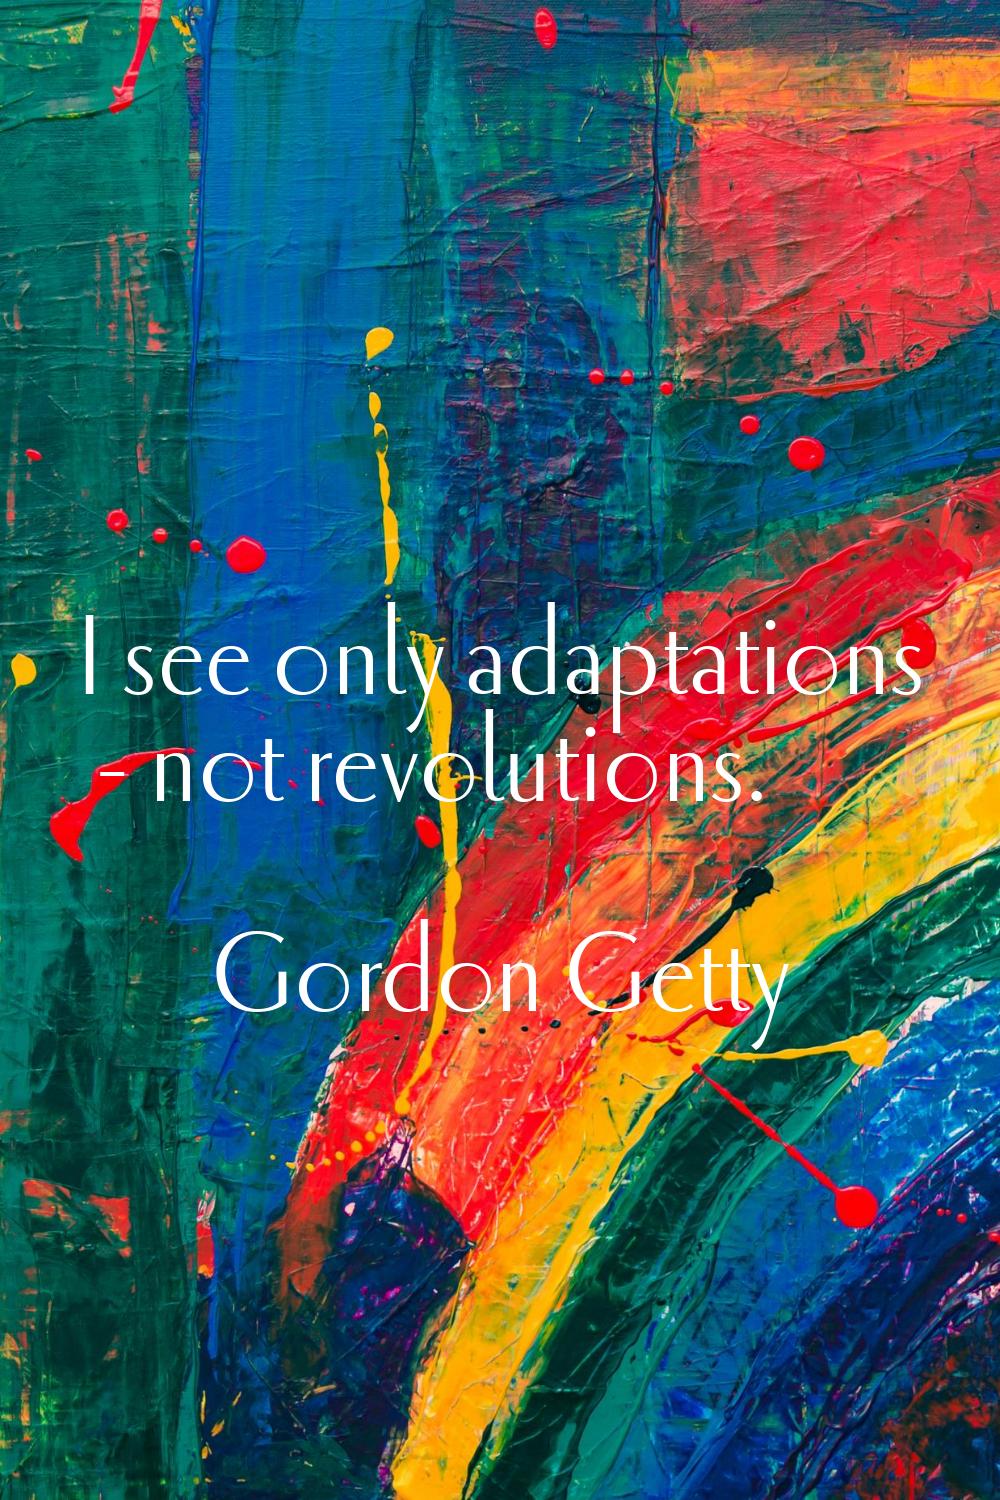 I see only adaptations - not revolutions.